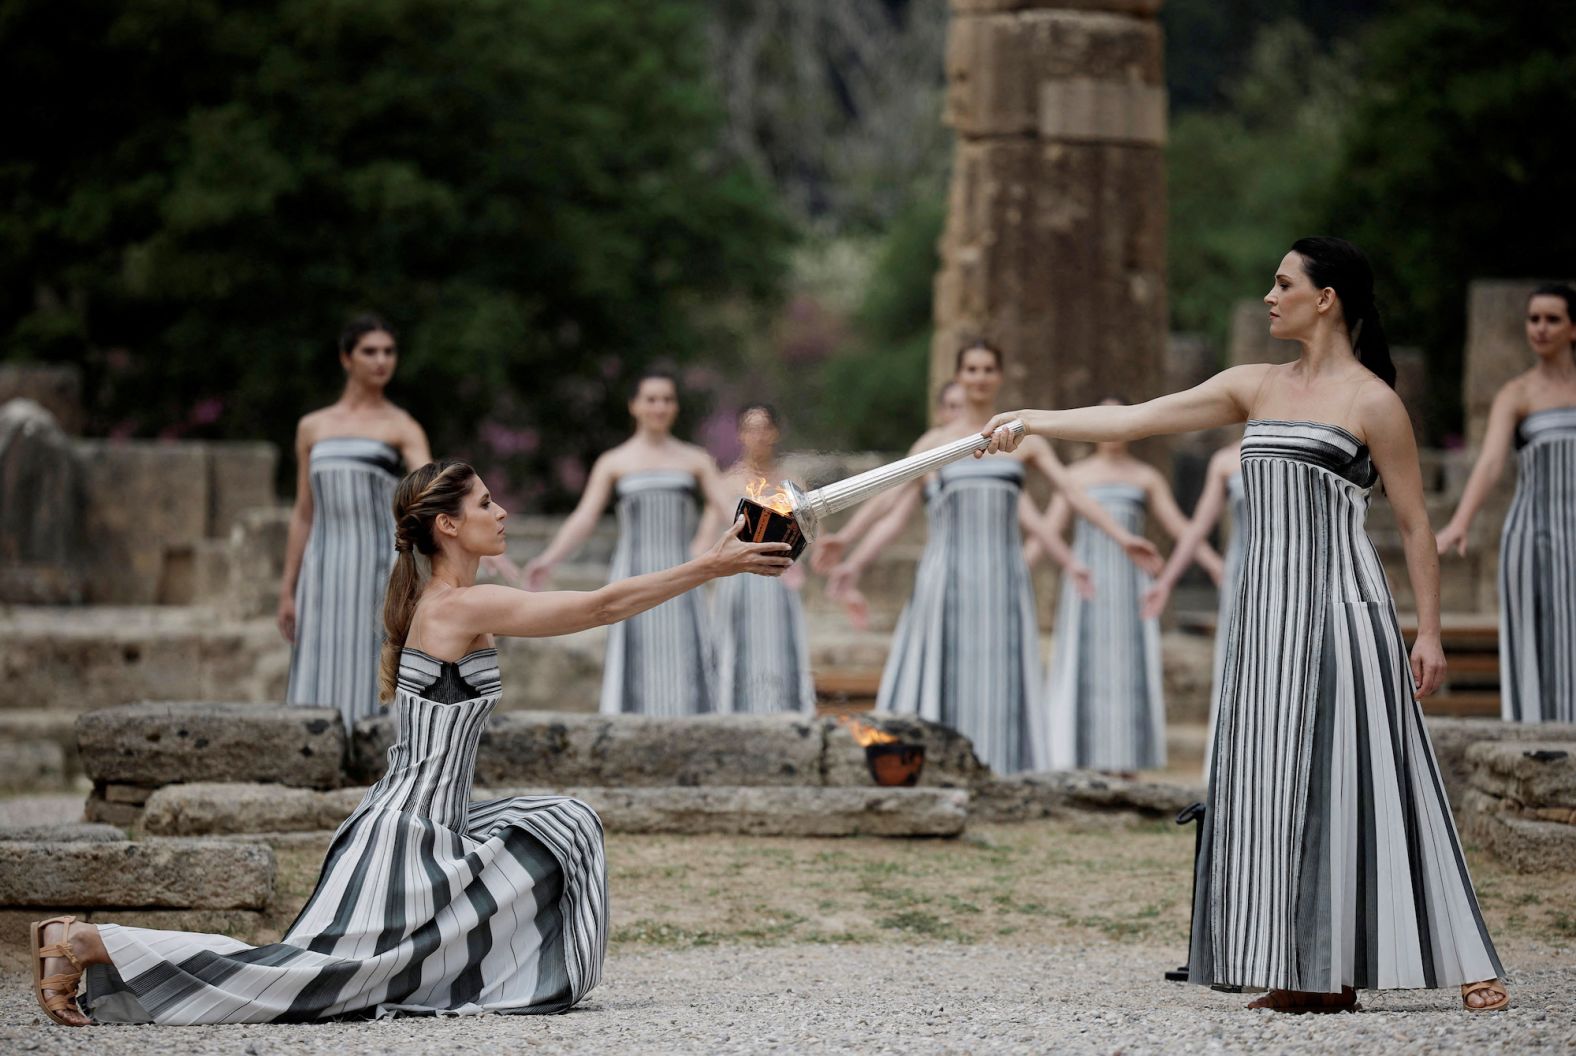 Greek actress Mary Mina, playing the role of High Priestess, carries the torch during the <a href="https://www.cnn.com/2024/04/16/sport/paris-2024-olympic-flame-lit-spt-intl/index.html" target="_blank">Olympic flame lighting ceremony</a> for the Paris 2024 Olympics in Ancient Olympia, Greece, on Tuesday, April 16. The flame will now begin its journey in a relay to light the cauldron that will mark the opening for the Summer Games in July.